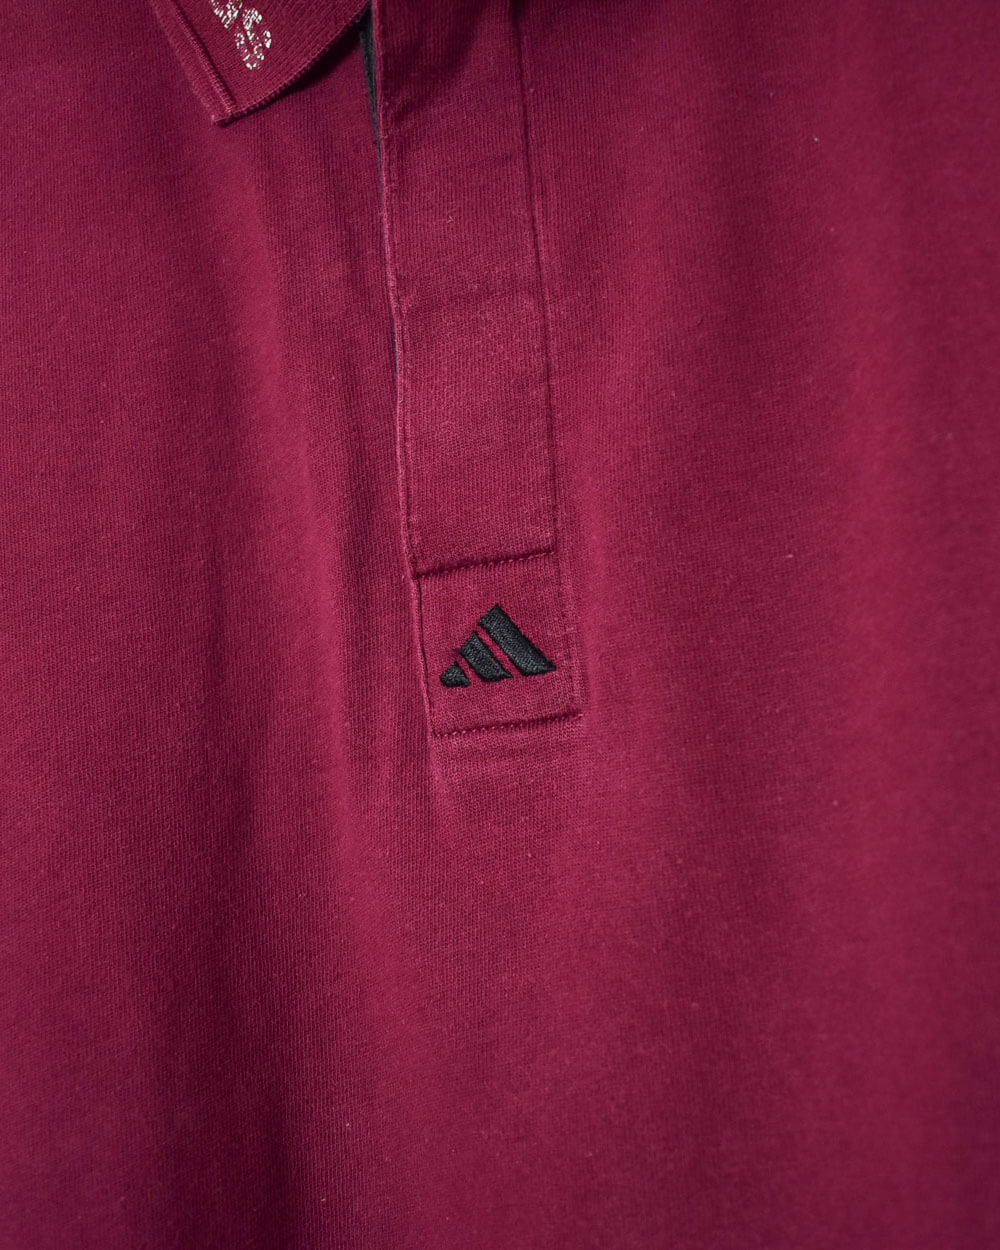 Adidas Equipment Polo Shirt - X-Large - Domno Vintage 90s, 80s, 00s Retro and Vintage Clothing 